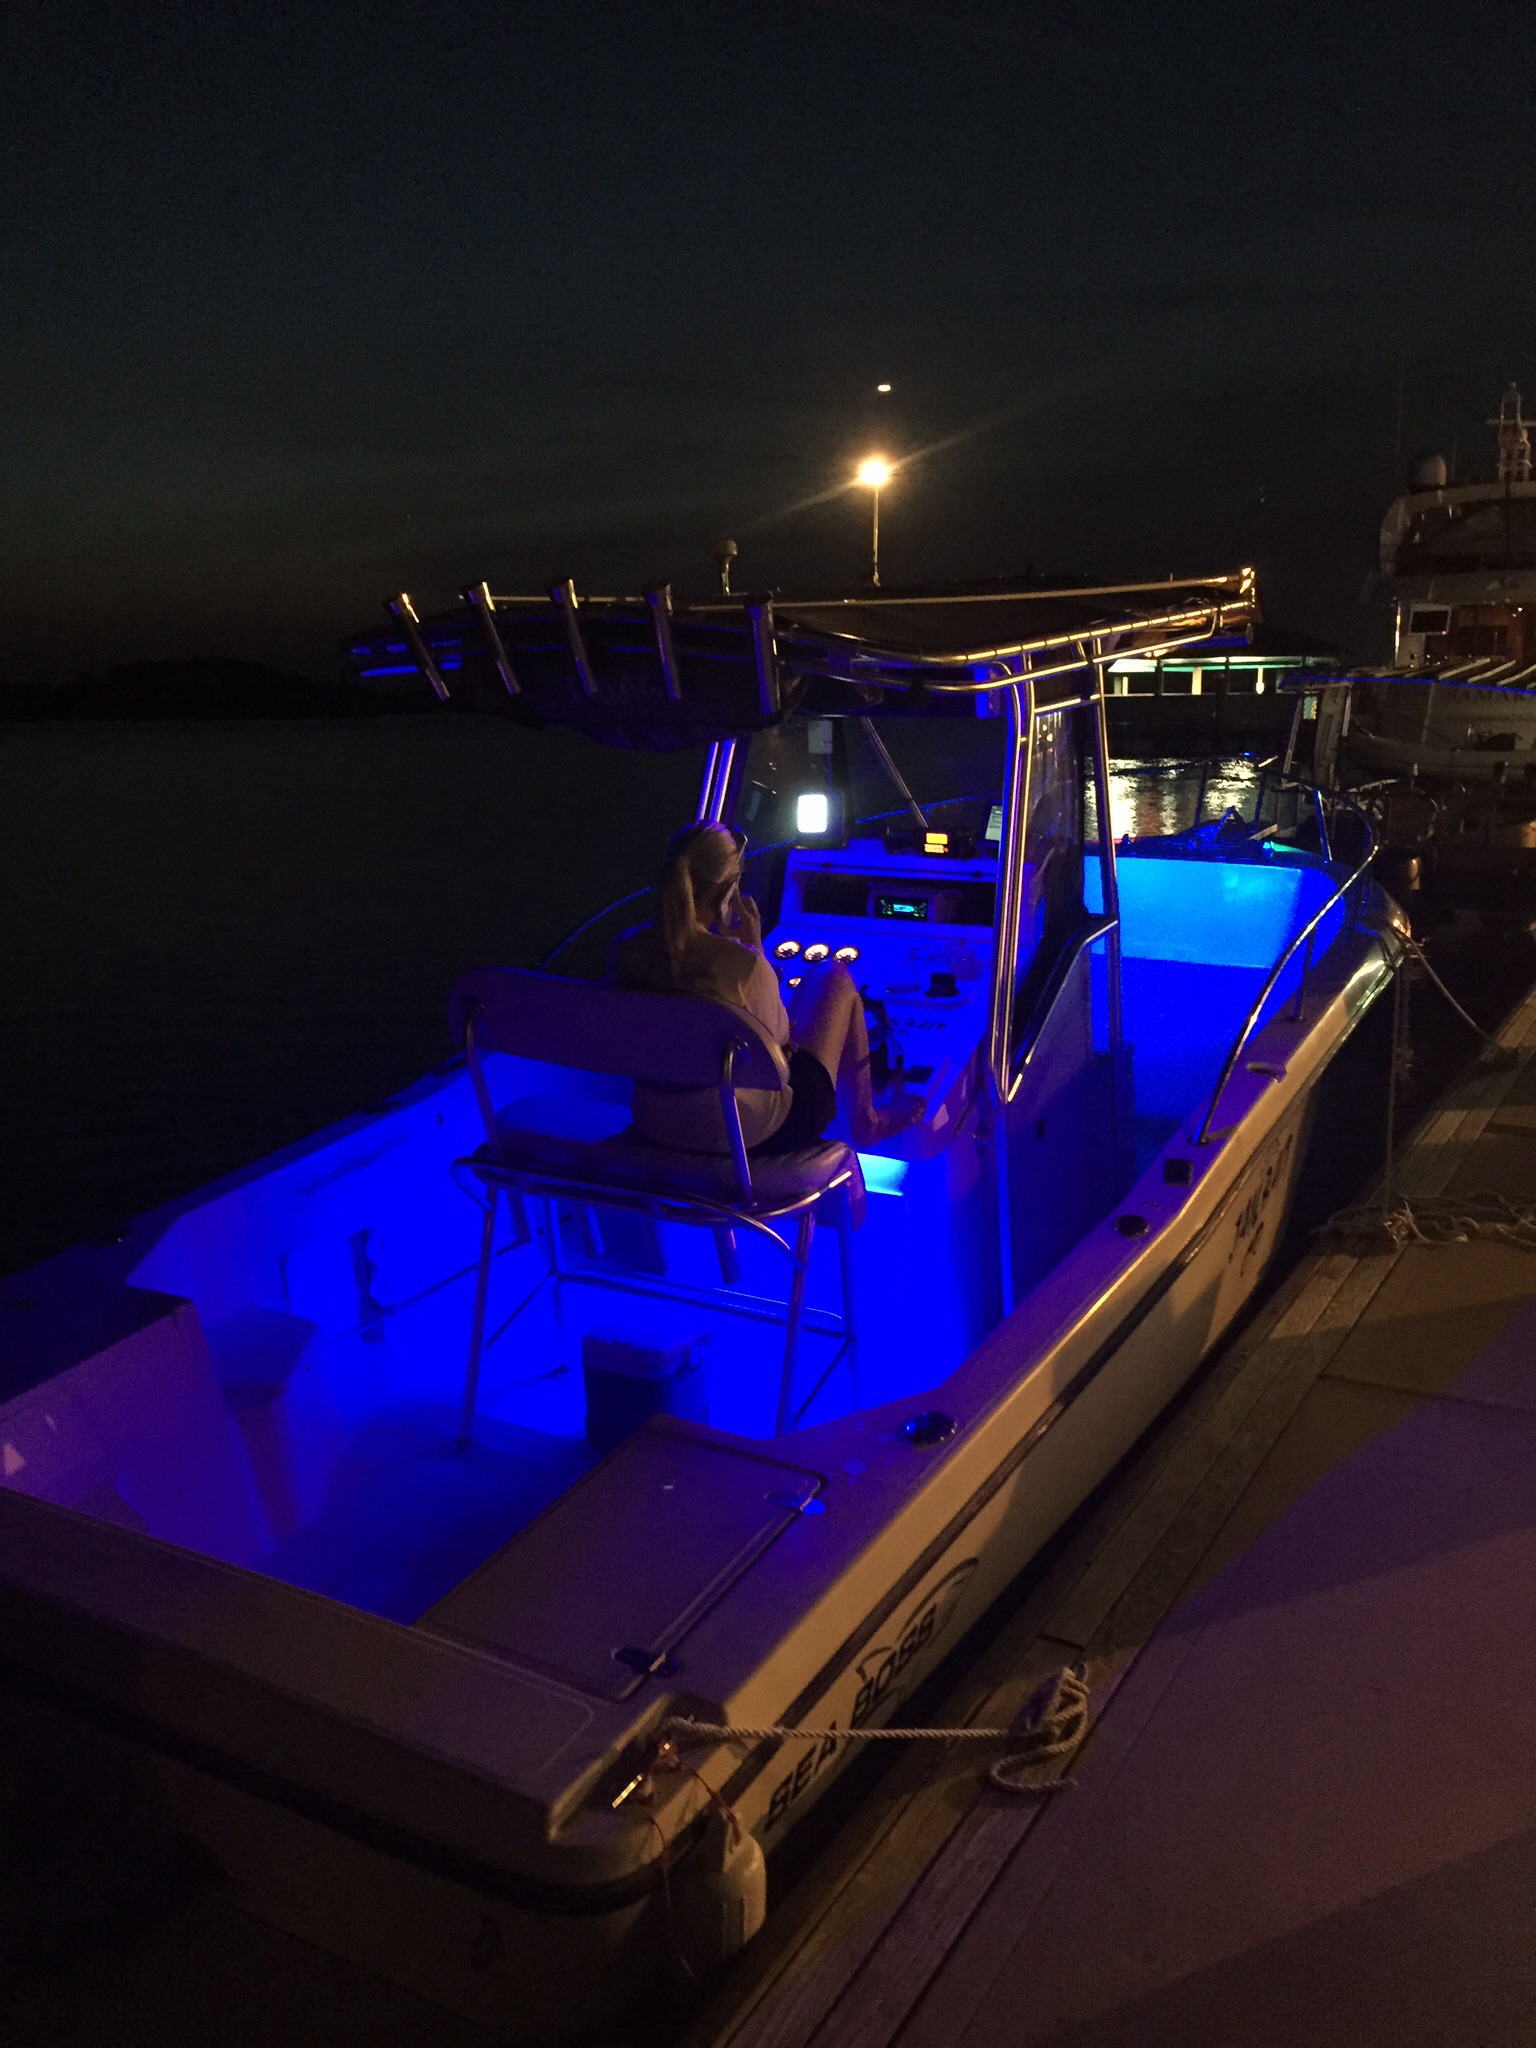 Post your boat at night, LED lights - The Hull Truth - Boating and ...